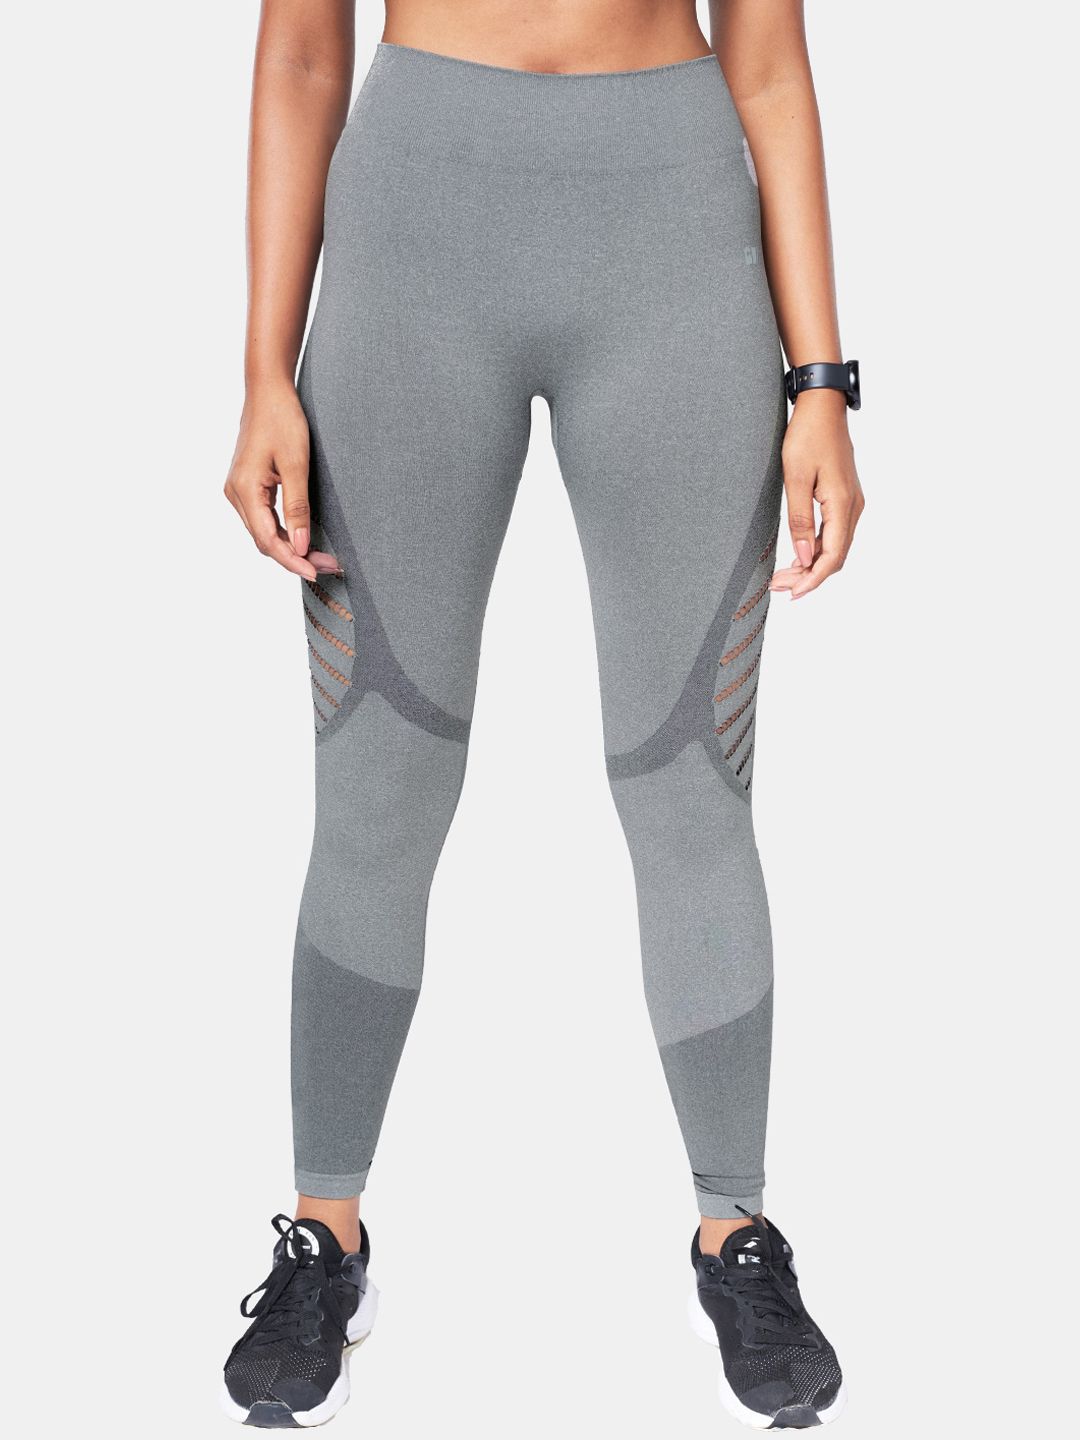 The Souled Store Women Grey Tss Active Semi Sheer Running Tights Price in India